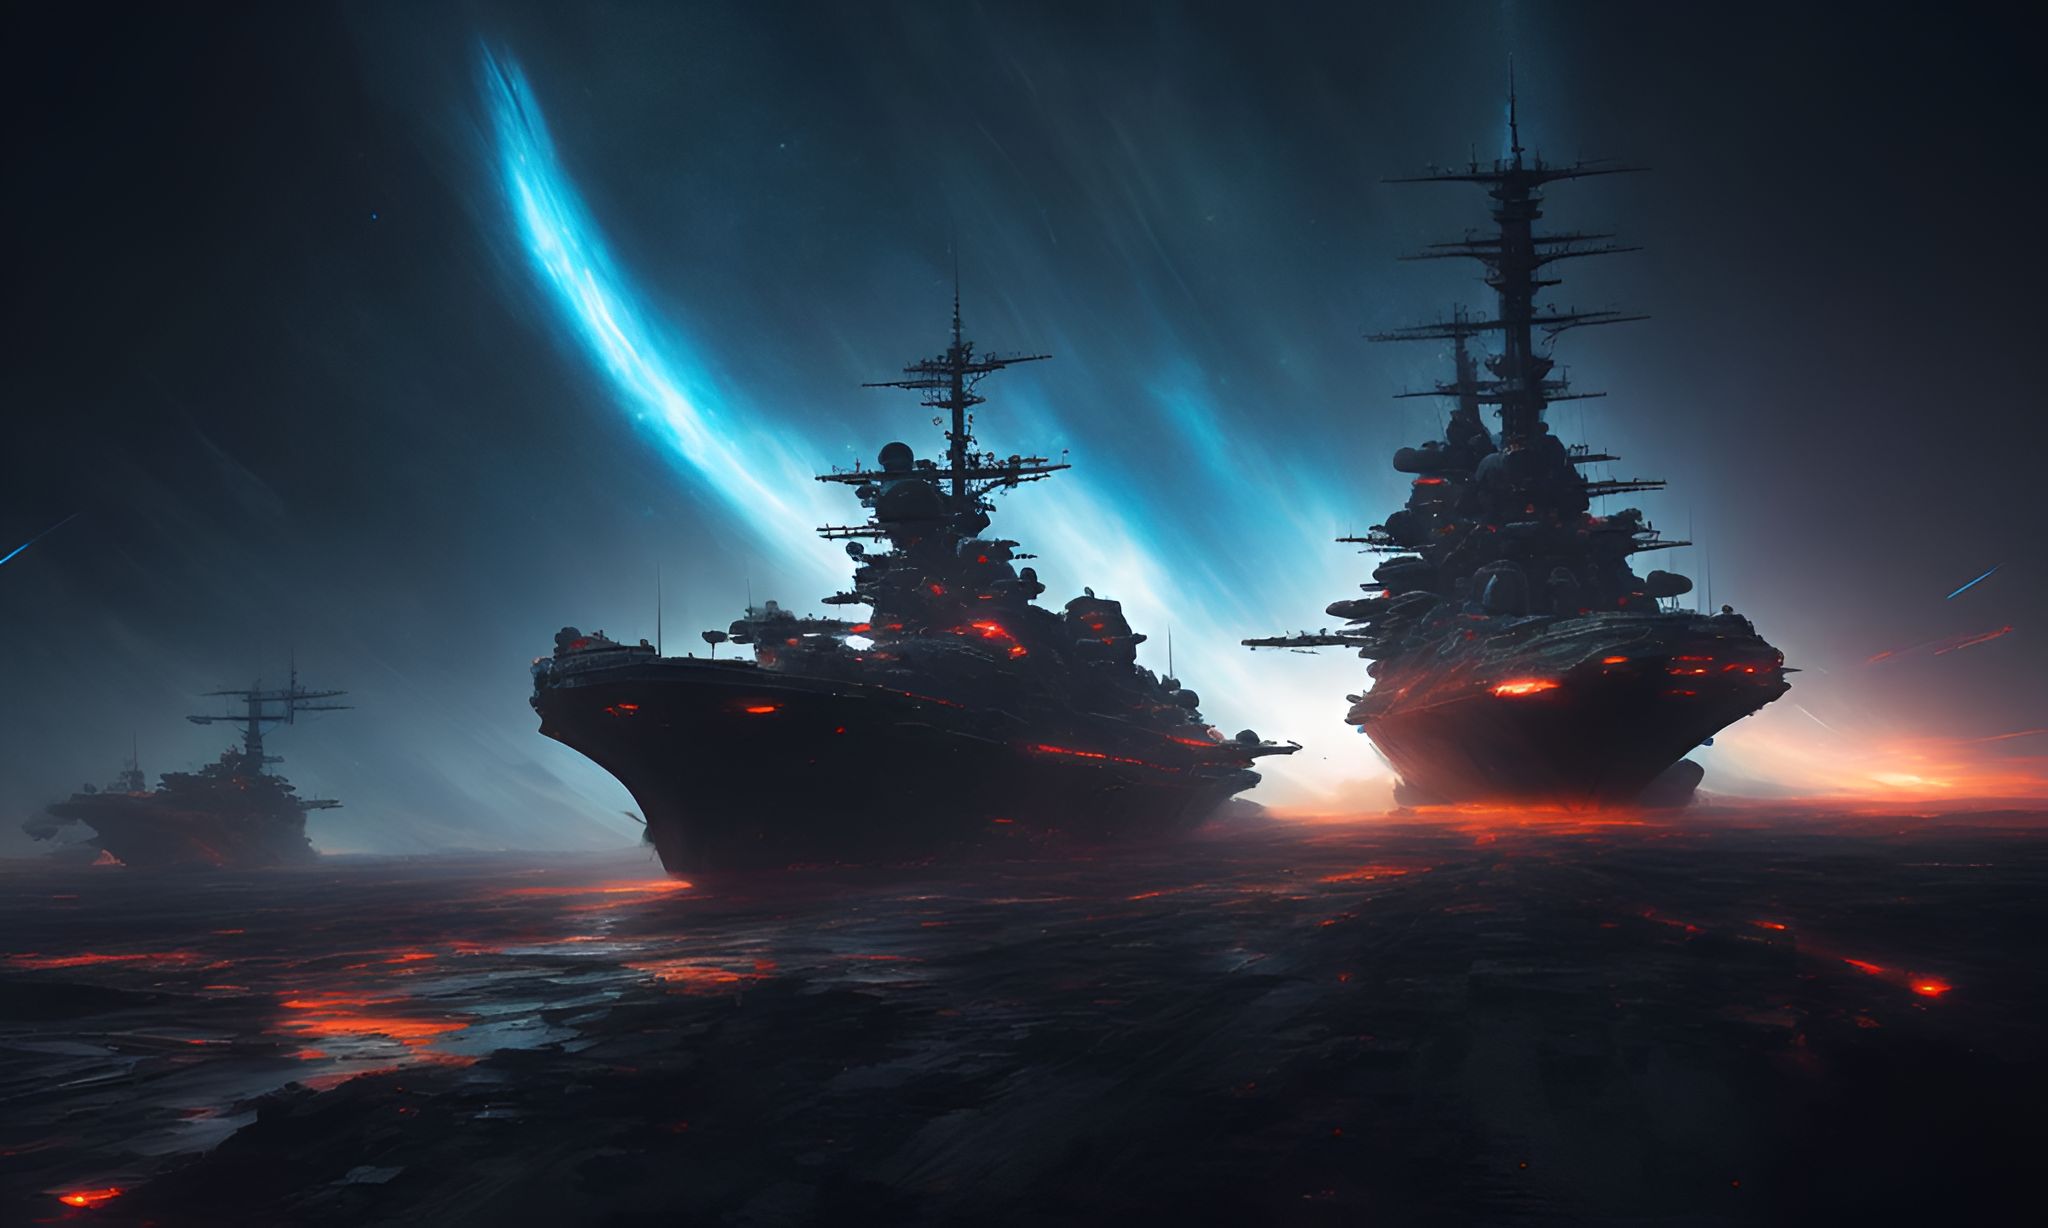 SuperHumanEpoch: Cinematic Still, intense space battle between two massive  battleships, starry sky, nebulae, galaxies, HDR futuristic space battleship  destroyers traveling through an asteroid field, planer in the isolated  blurred background